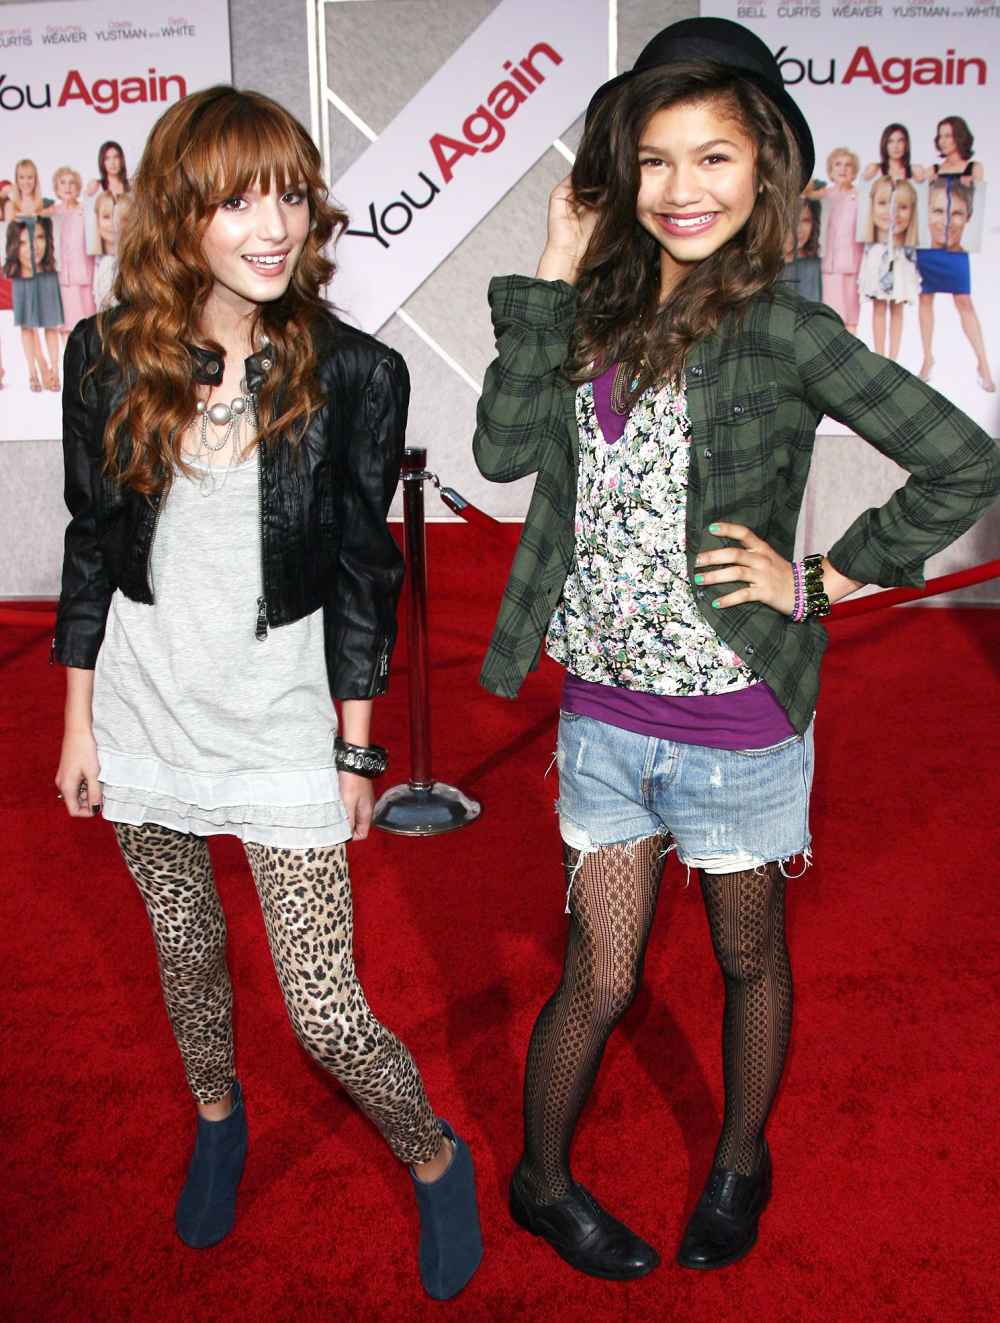 Bella Thorne and Zendaya Coleman in 2010 Bella Thorne Reflects on Being Pitted Against Shake It Up Costar Zendaya and Said They We Were Not Friends at First